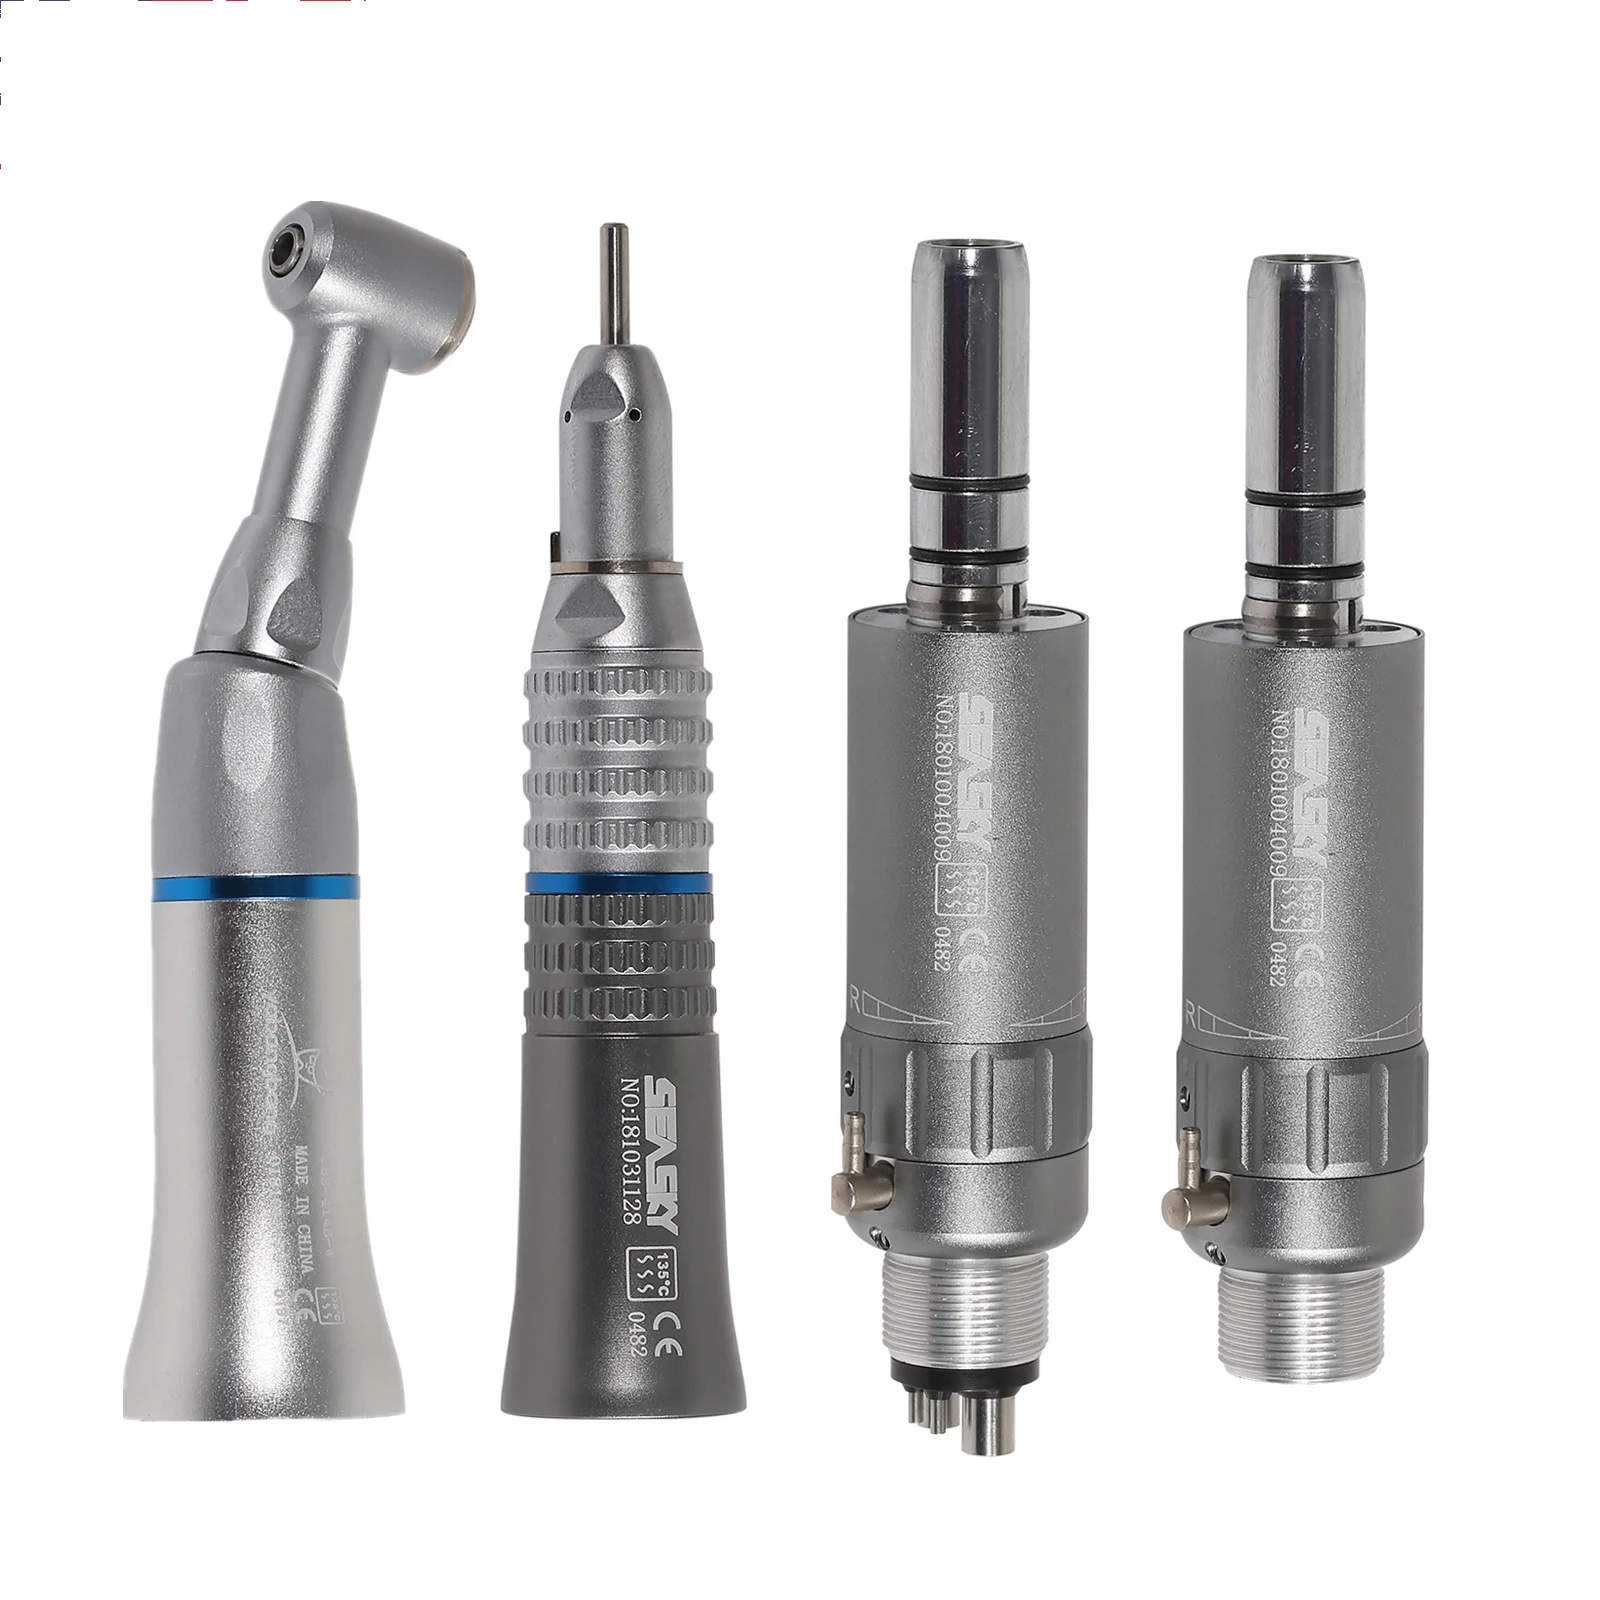 

Dental Handpiece External Low Speed Turbine Contra Angle Straight Nosecone With 4/2 Hole Motor Push Button Fit Bur 2.35 CA/RA